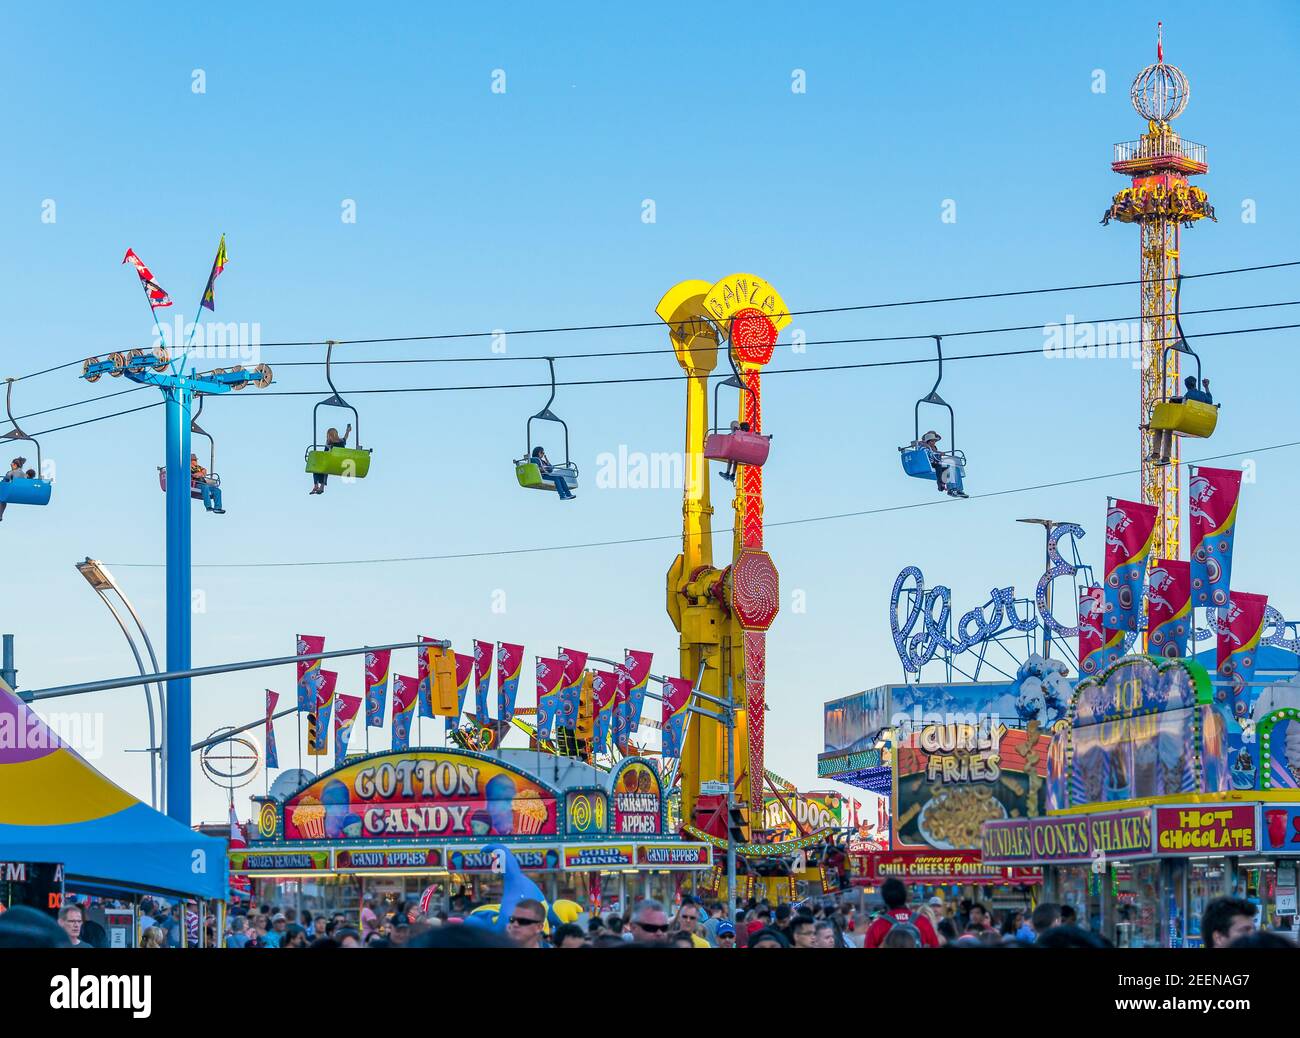 CNE or Canada National Exhibition: General view of amusement rides, food stands, and public. Stock Photo